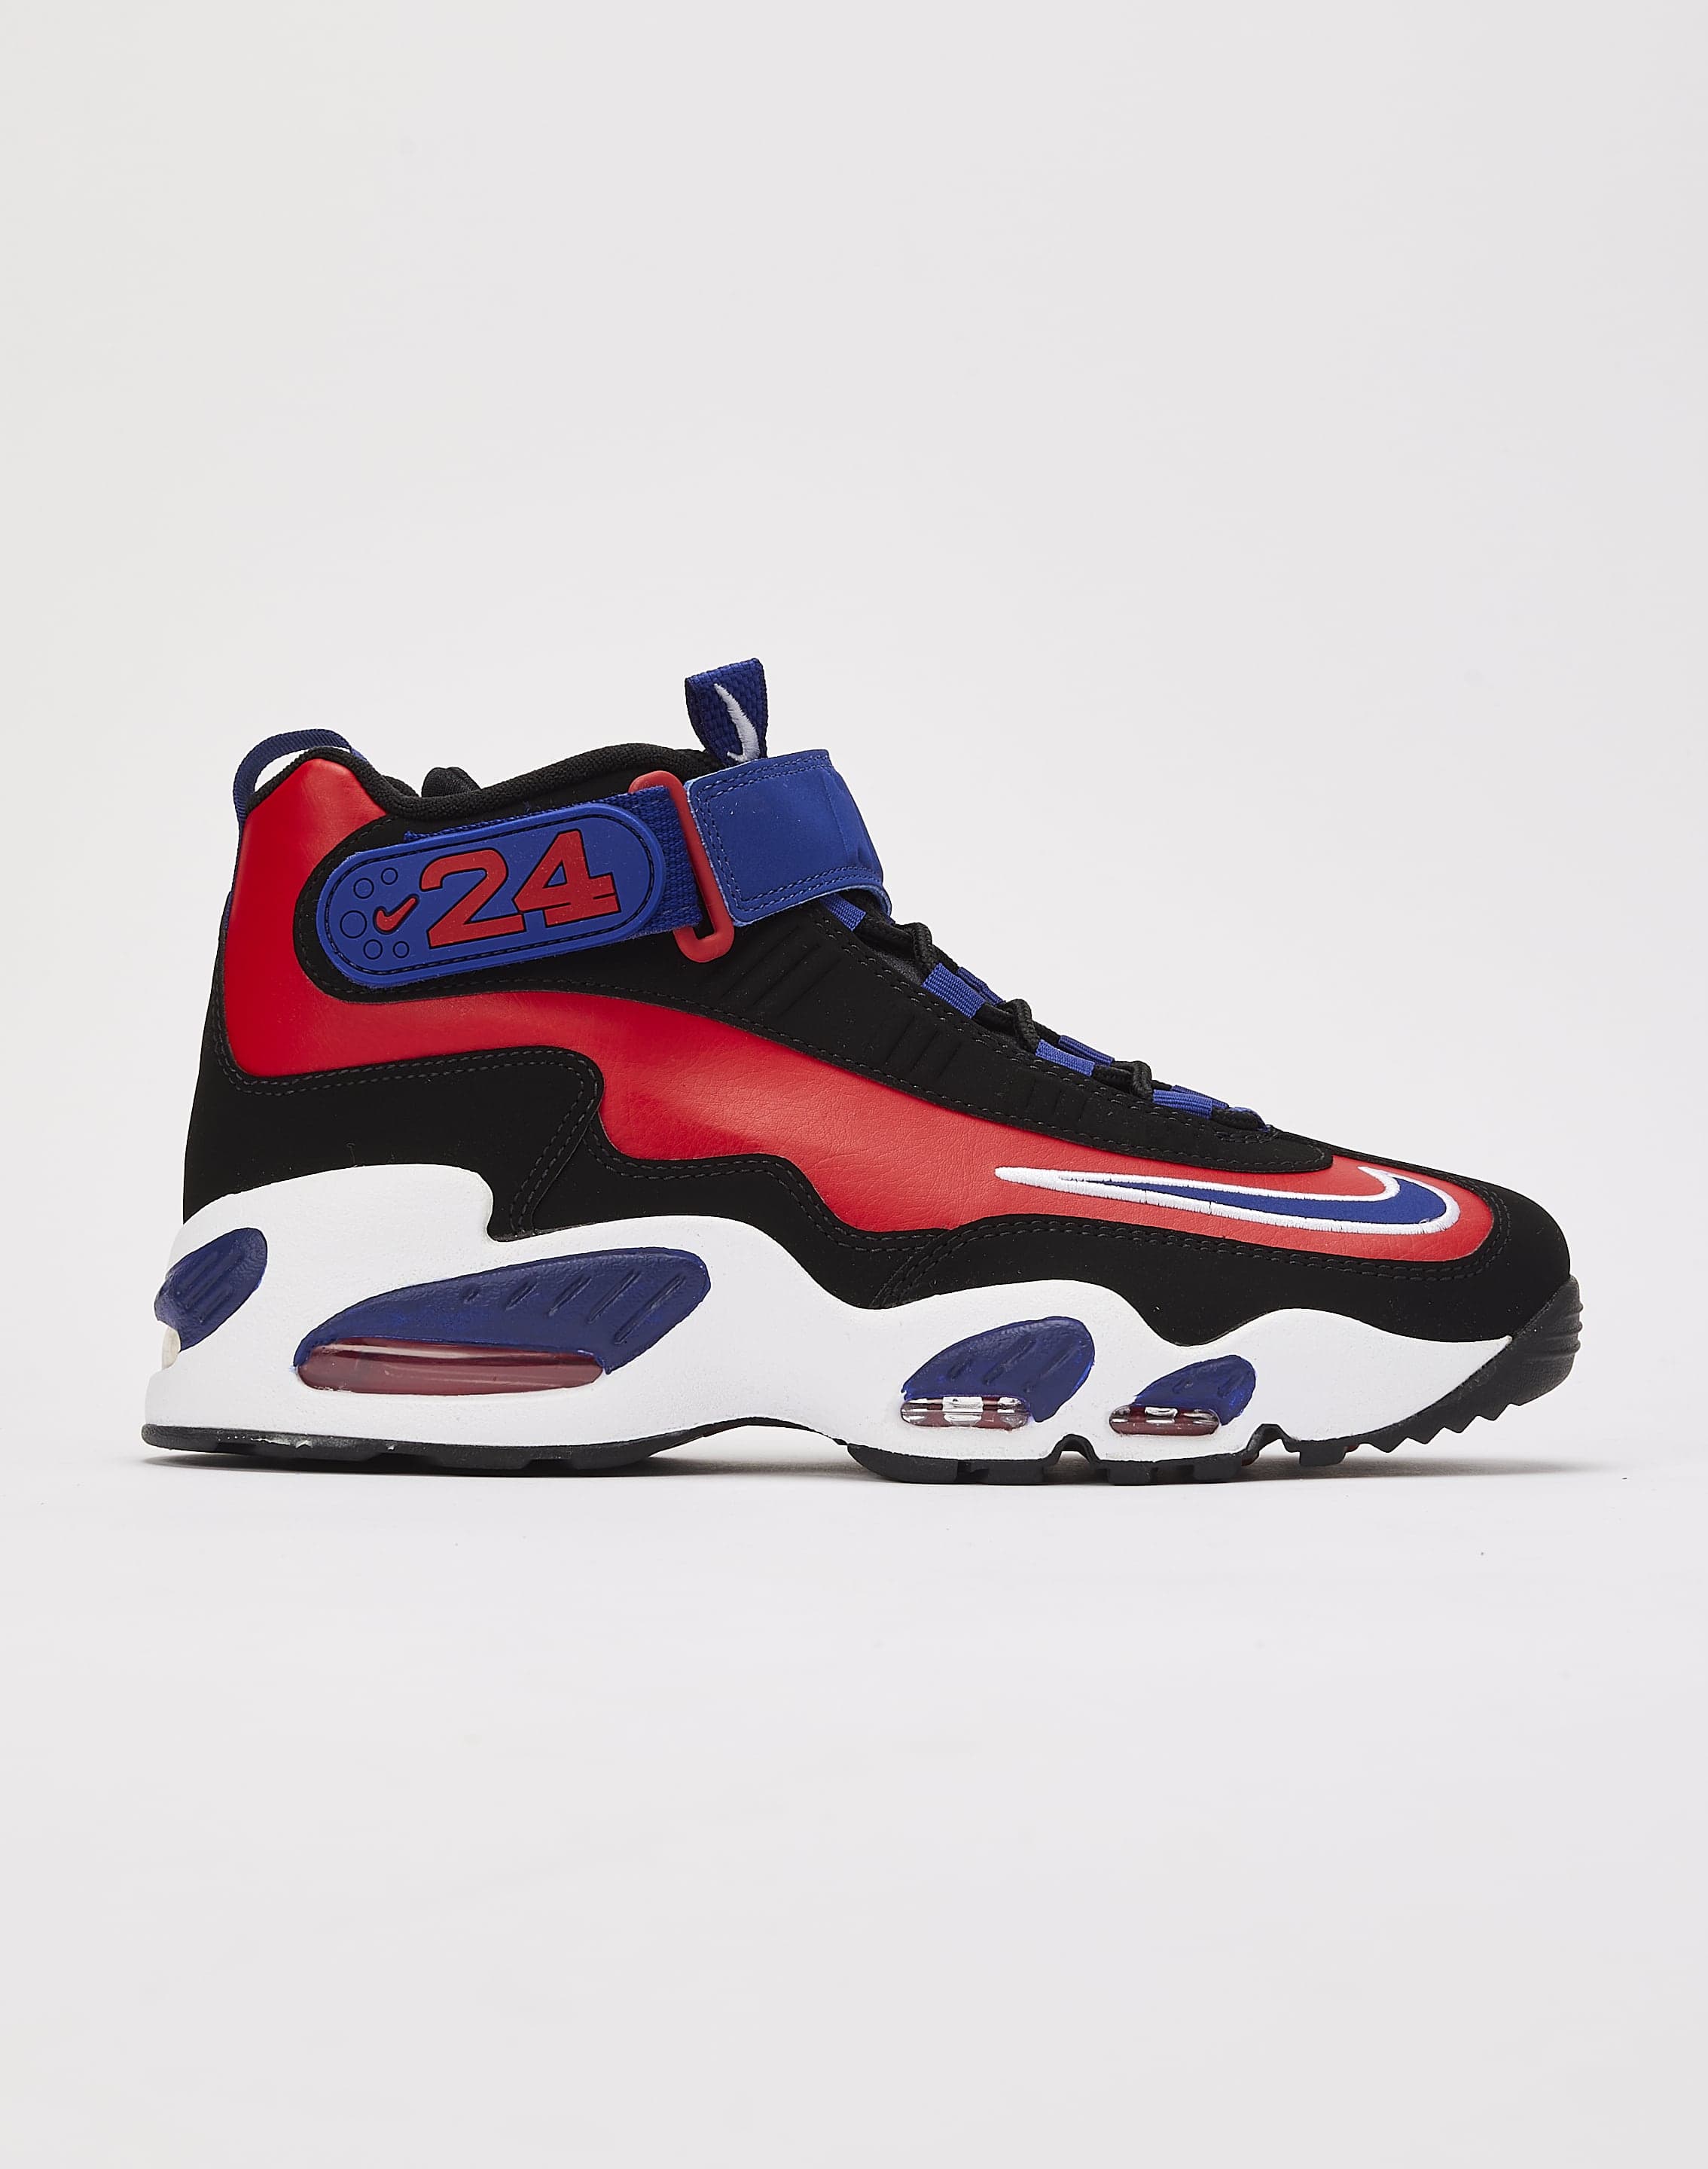 You Can Buy This Nike Ken Griffey Jr. Retro Now